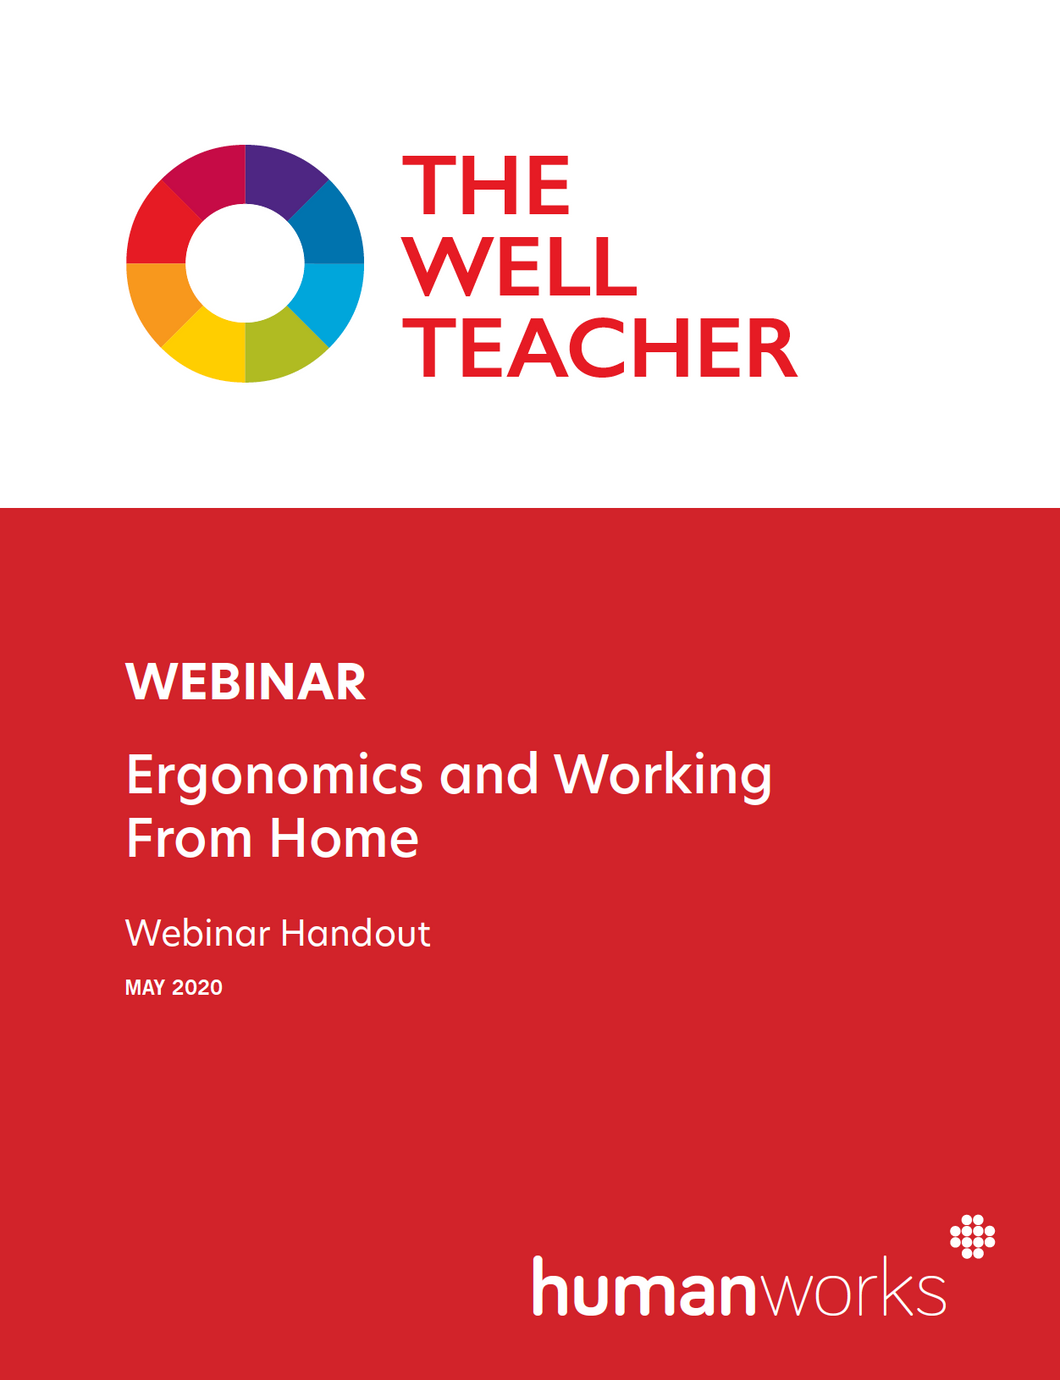 The Well Teacher Webinar Ergonomics and Working from Home handout title page